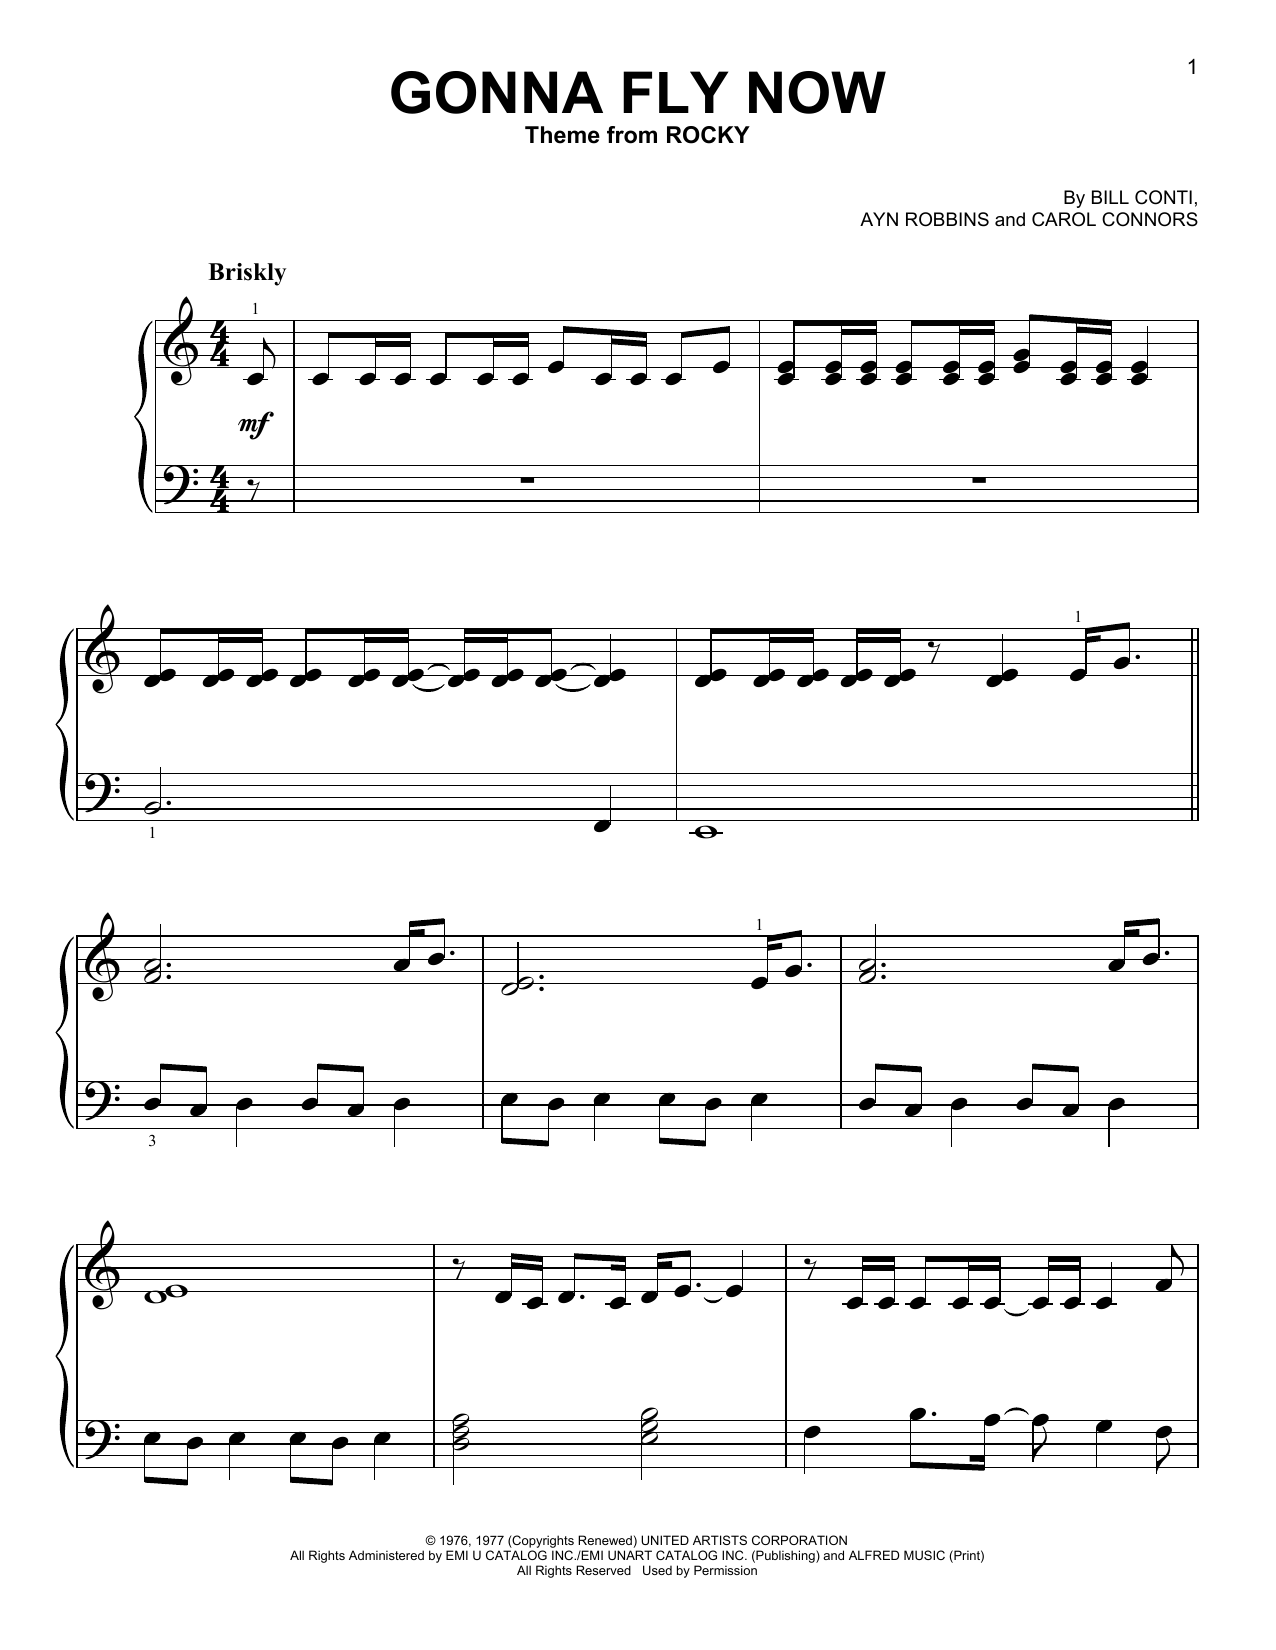 Download Ayn Robbins Gonna Fly Now (Theme from Rocky) Sheet Music